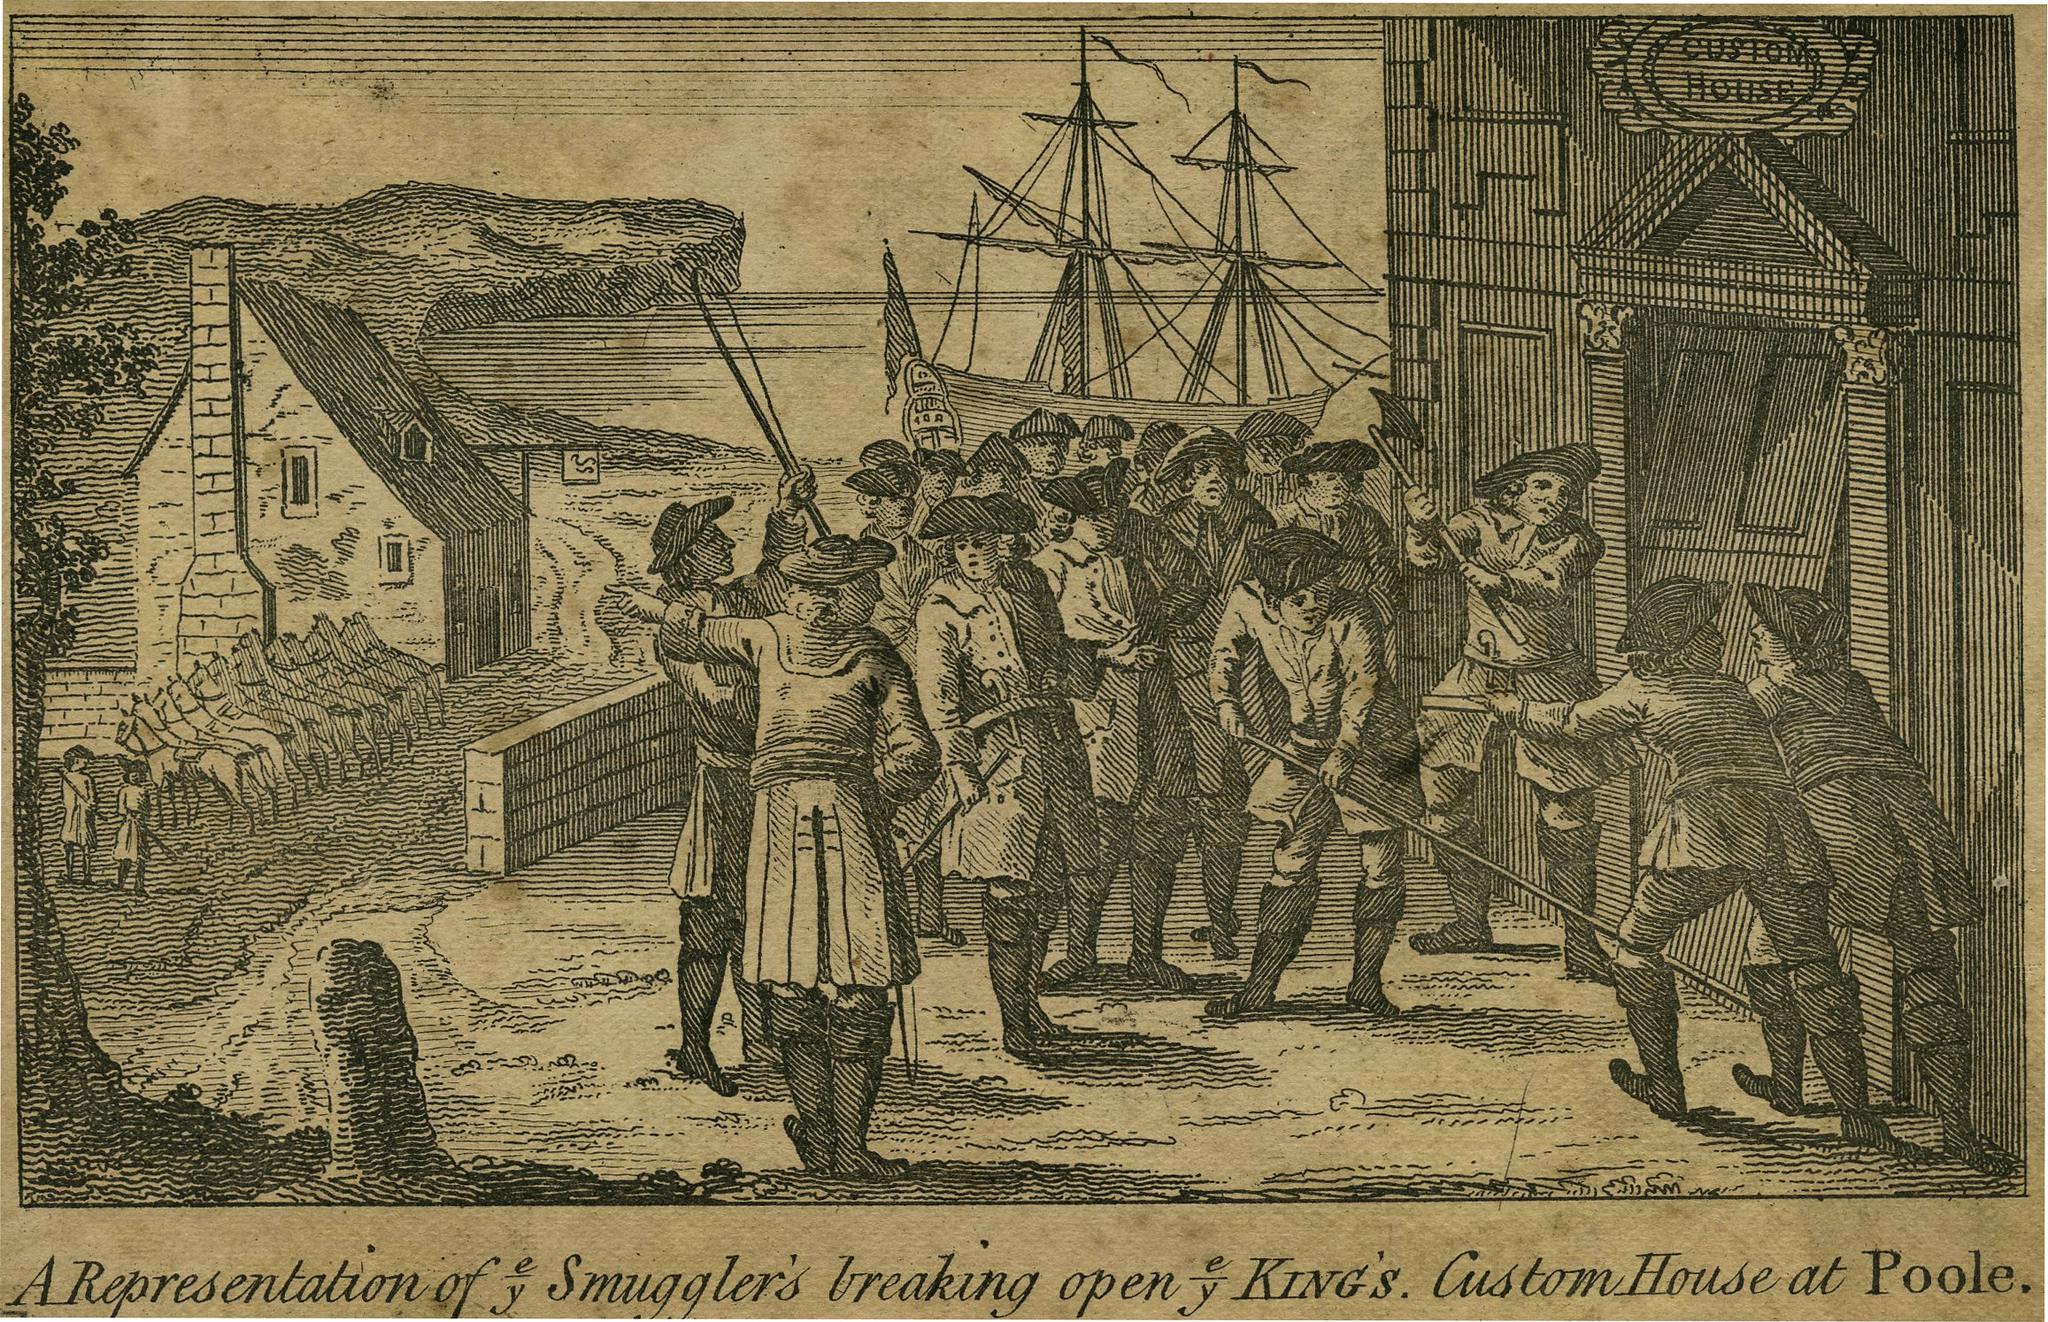 A representation of smuggler's breaking open ye King's Custom House at Poole